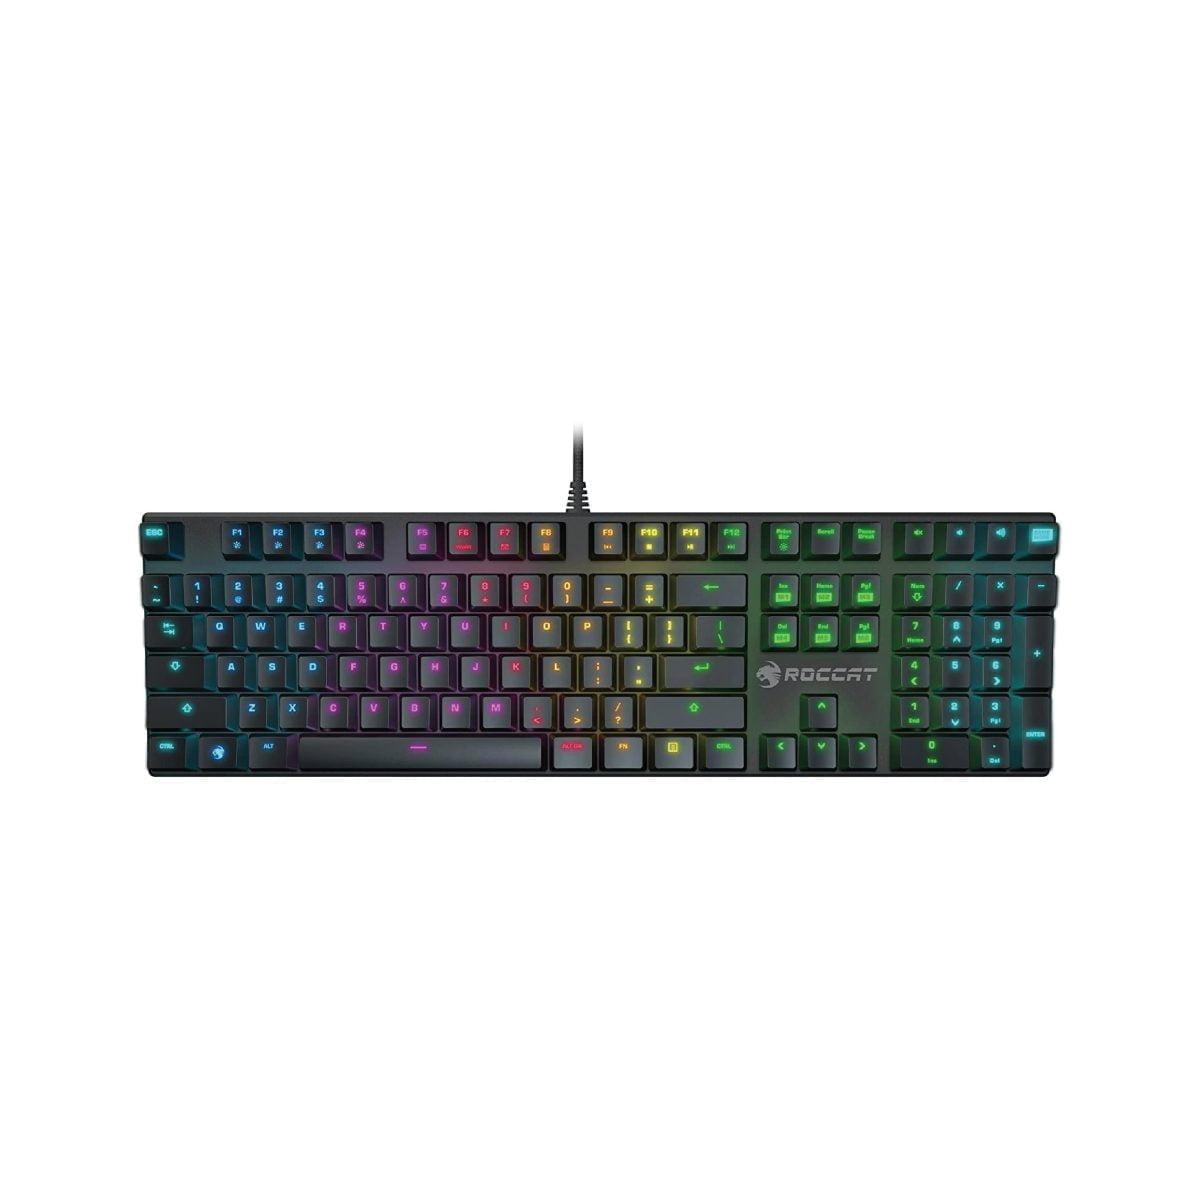 Ramadan2 24 Roccat 16.8M Color Key Back-Lighting With Quick Access To Stunning Effects Plus F1-F4 Key Lighting Fx Presets Quick Toggle: Wave, Breathing, Ripple, Solid Roccat Roccat Suora Fx - Rgb Illuminated Frameless Mechanical Gaming Keyboard